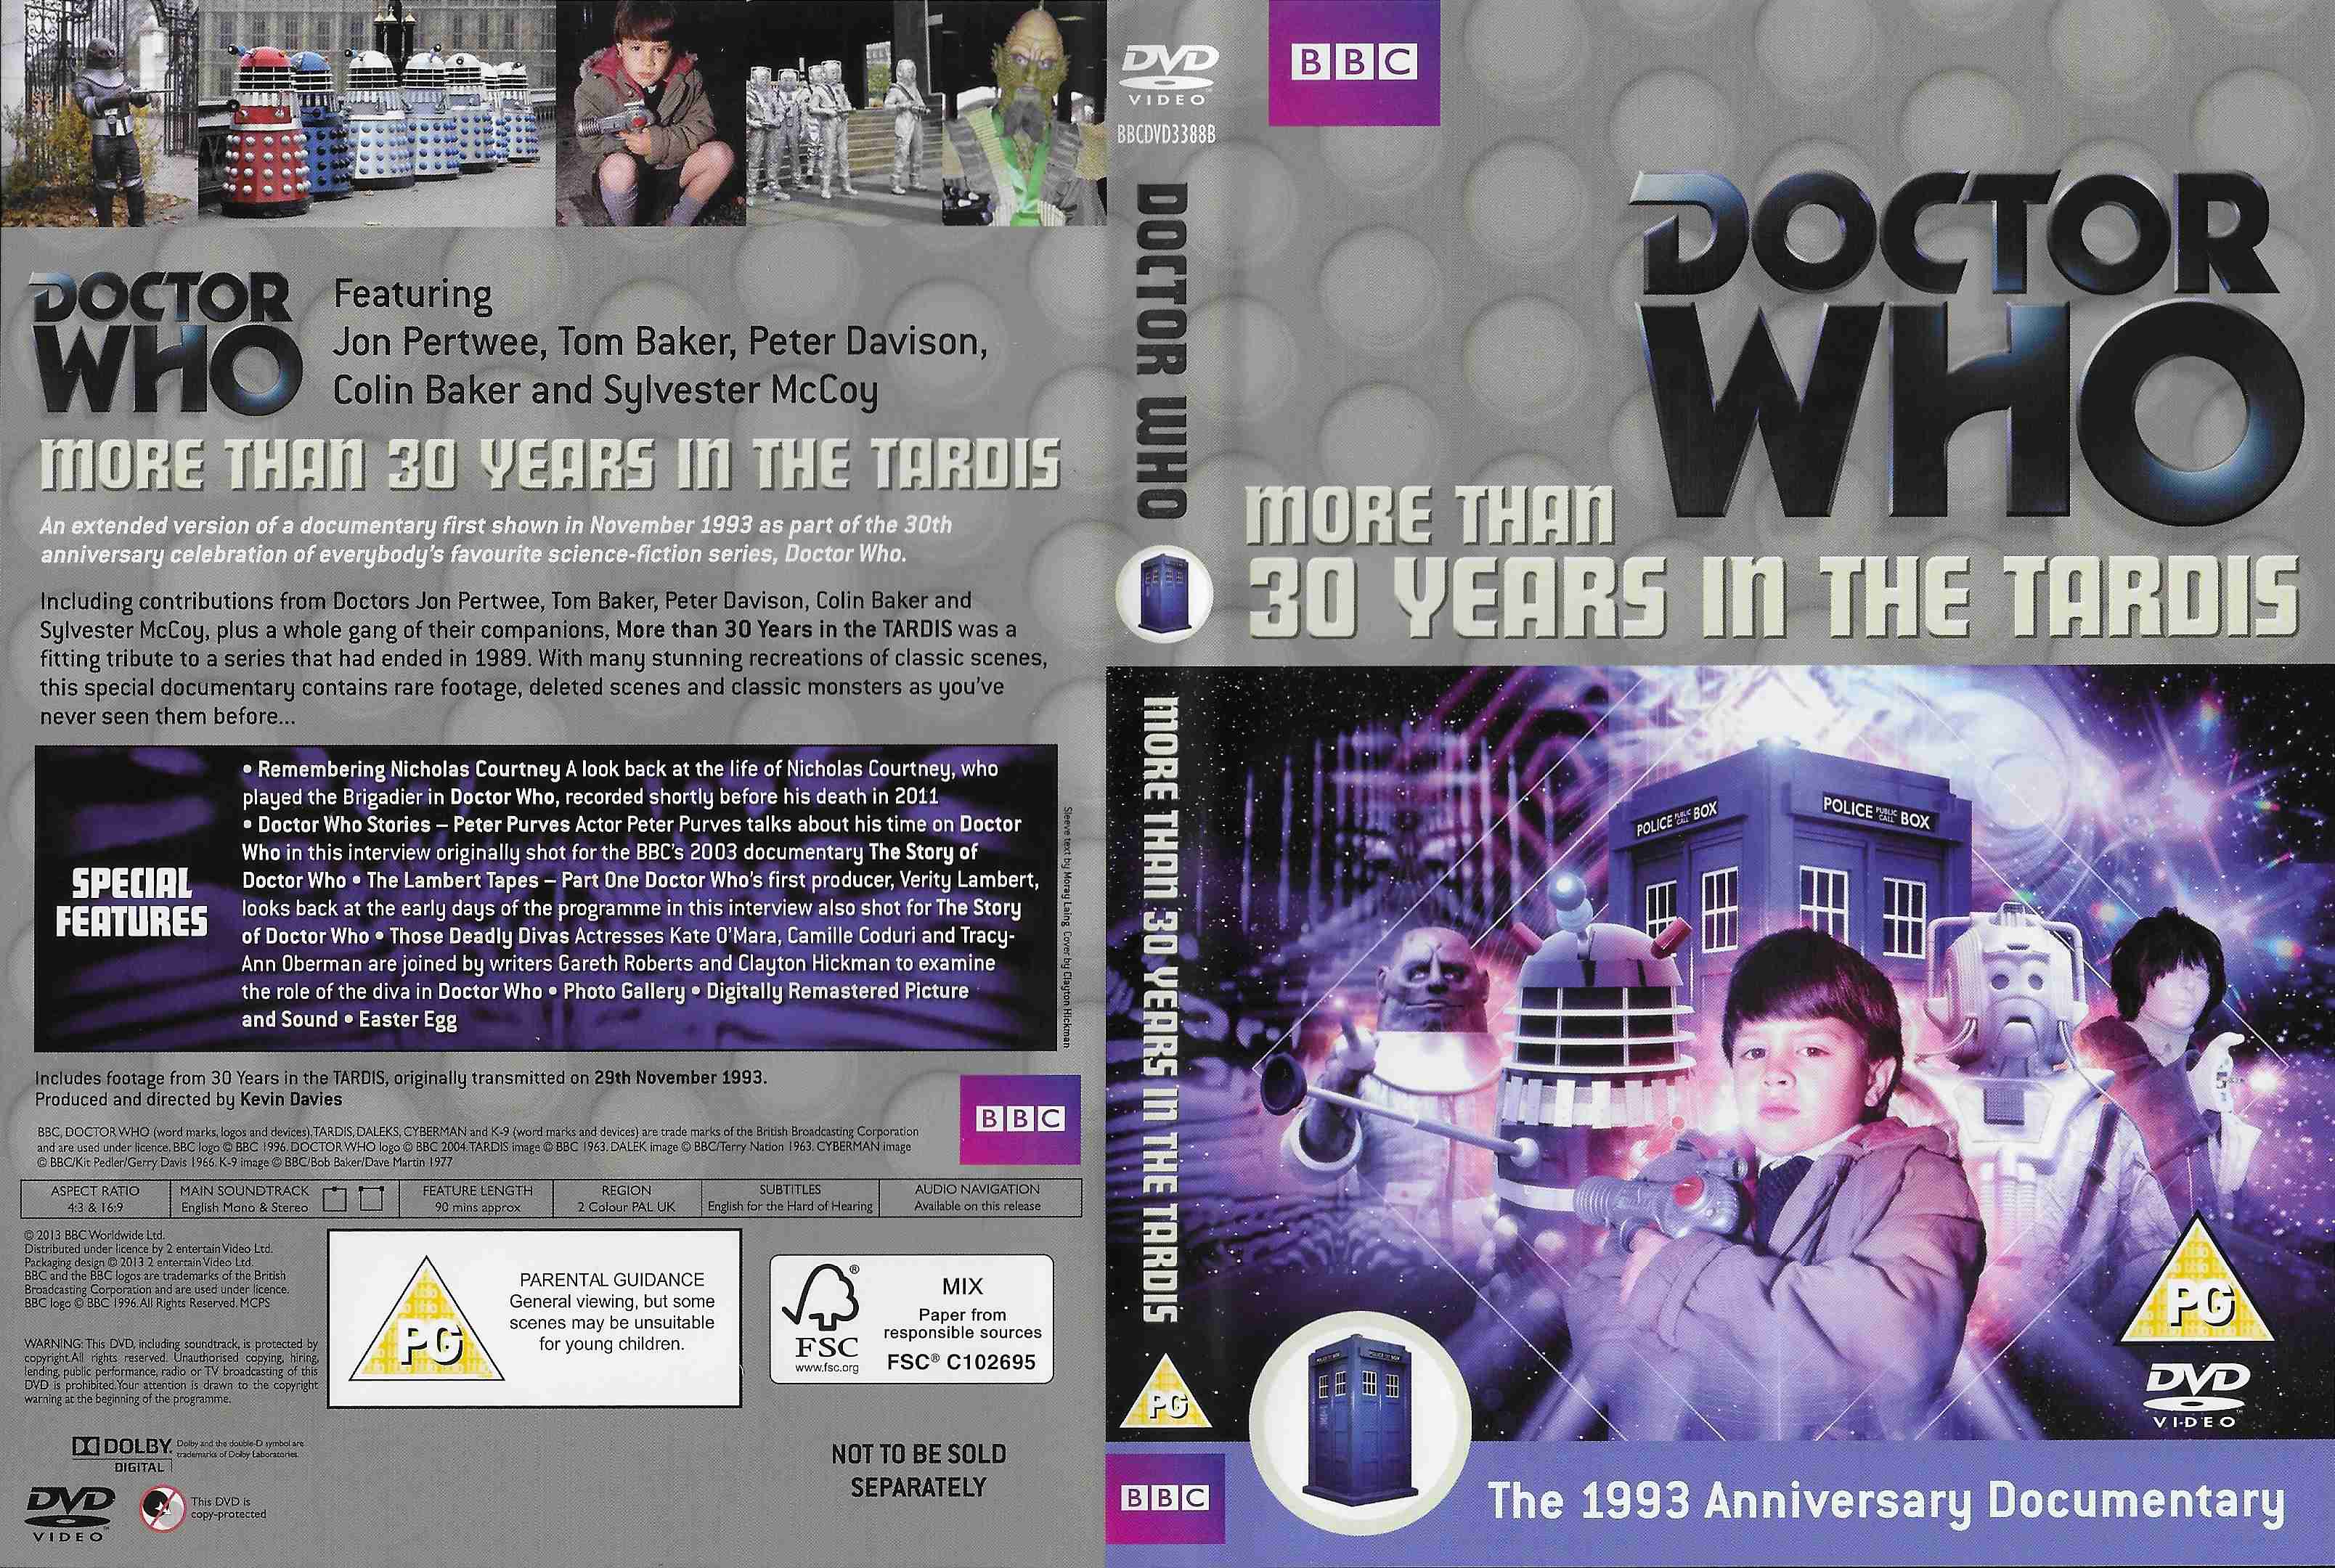 Picture of BBCDVD 3388B Doctor Who - More than 30 years in the TARDIS by artist Various from the BBC records and Tapes library